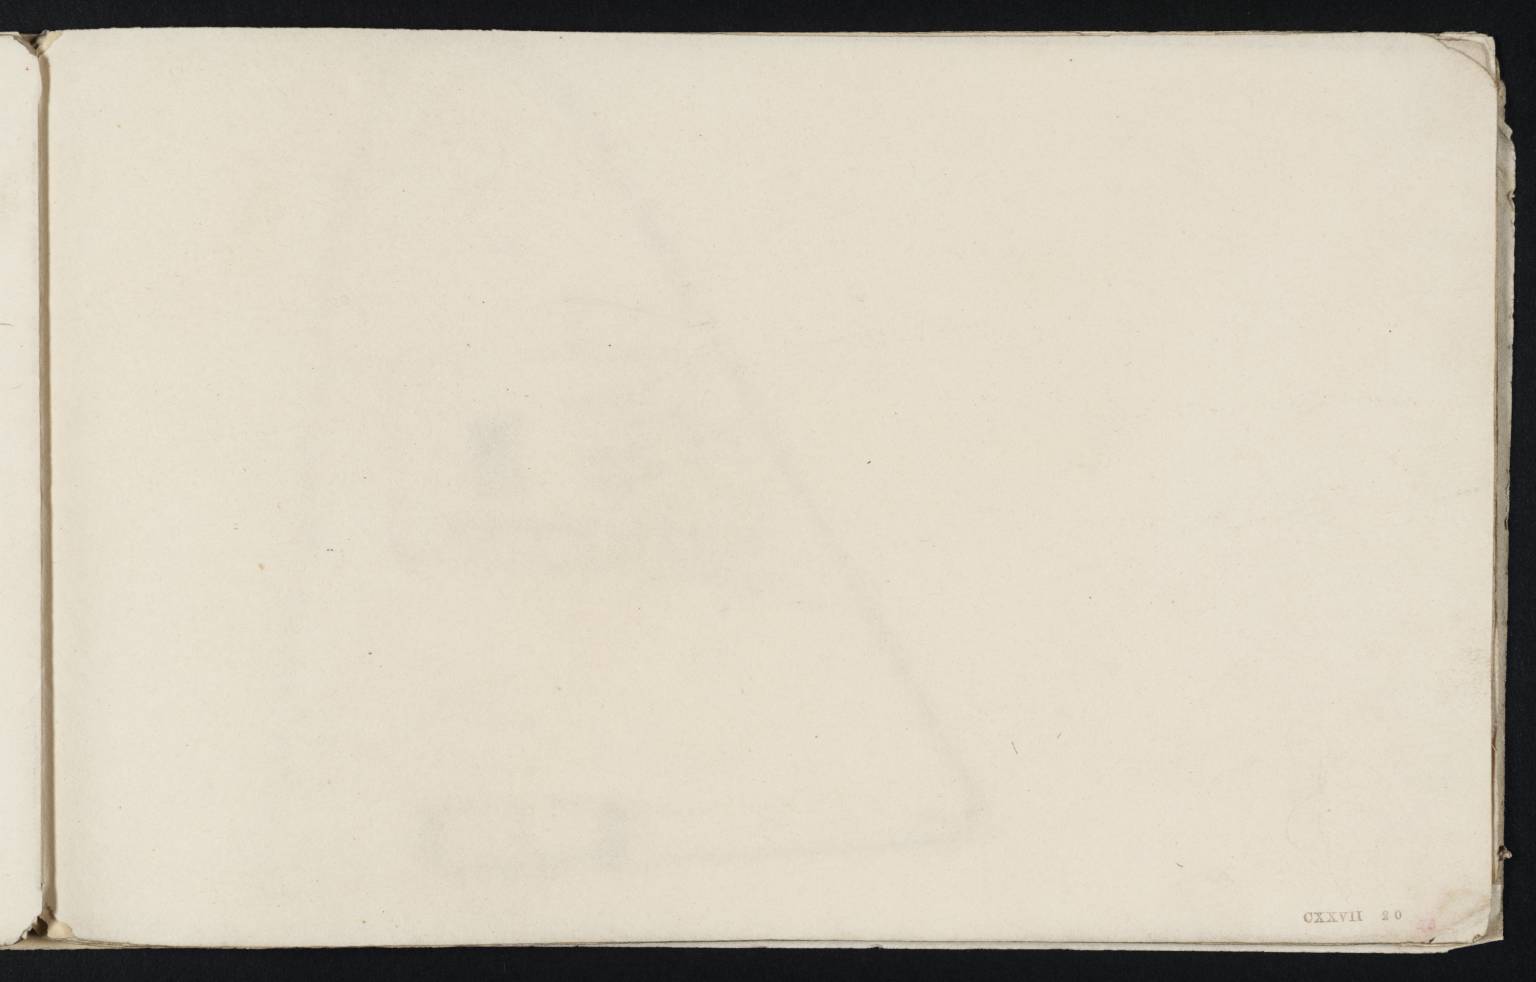 Joseph Mallord William Turner, 'Blank' (J.M.W. Turner: Sketchbooks,  Drawings and Watercolours)